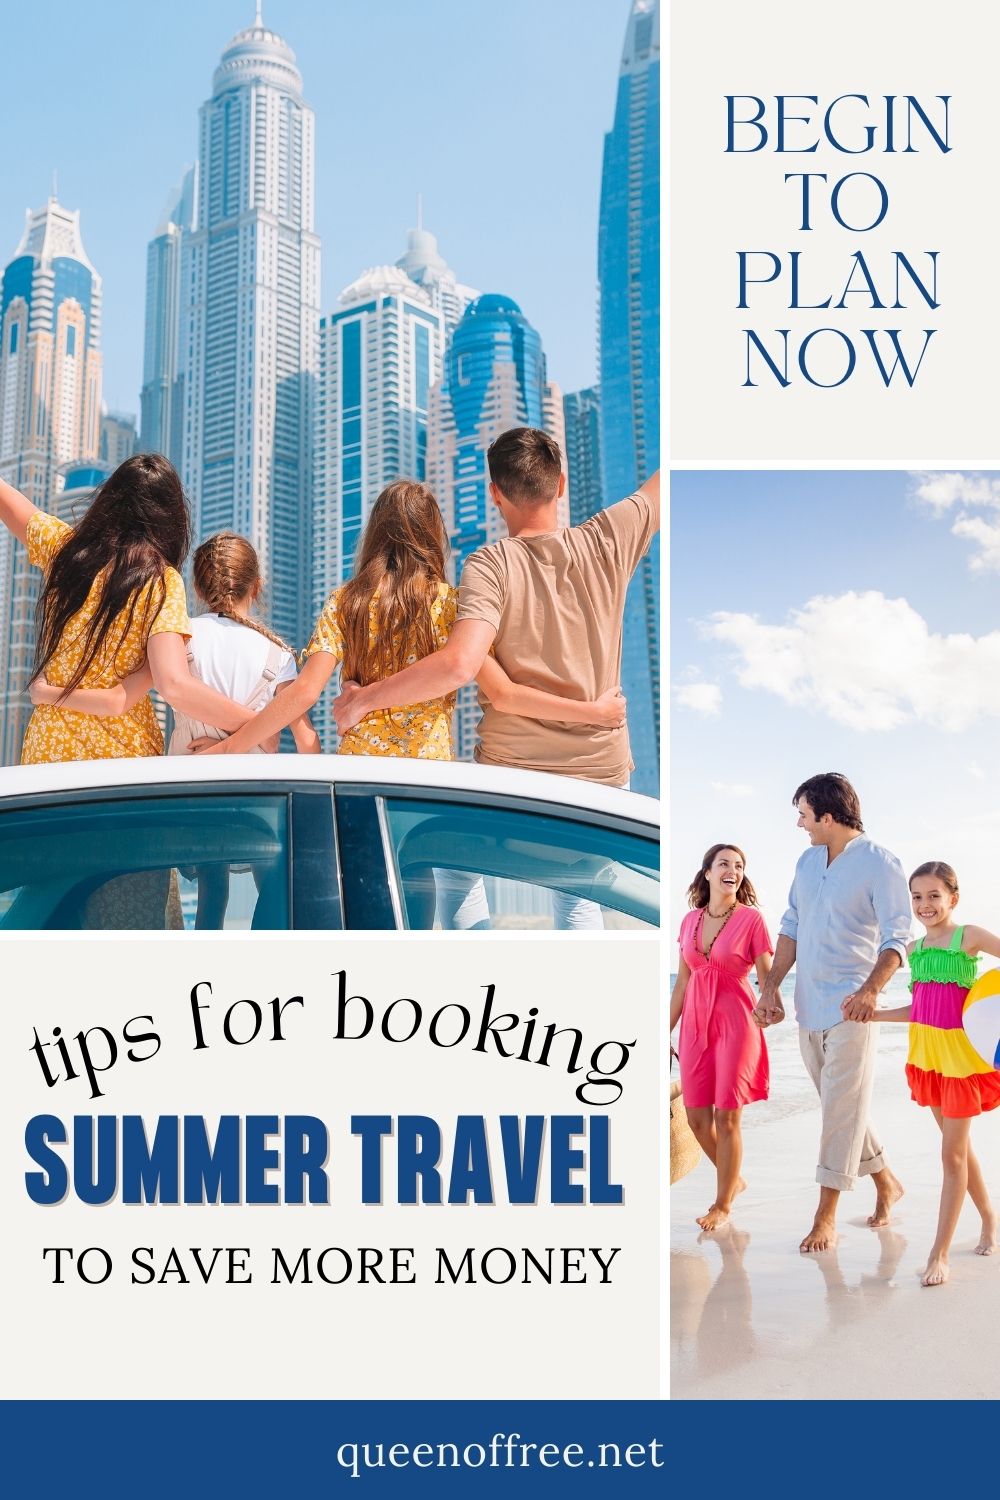 Save money on Summer Travel NOW. From booking an affordable place to stay to finding FREE attractions and more, check out these tips!